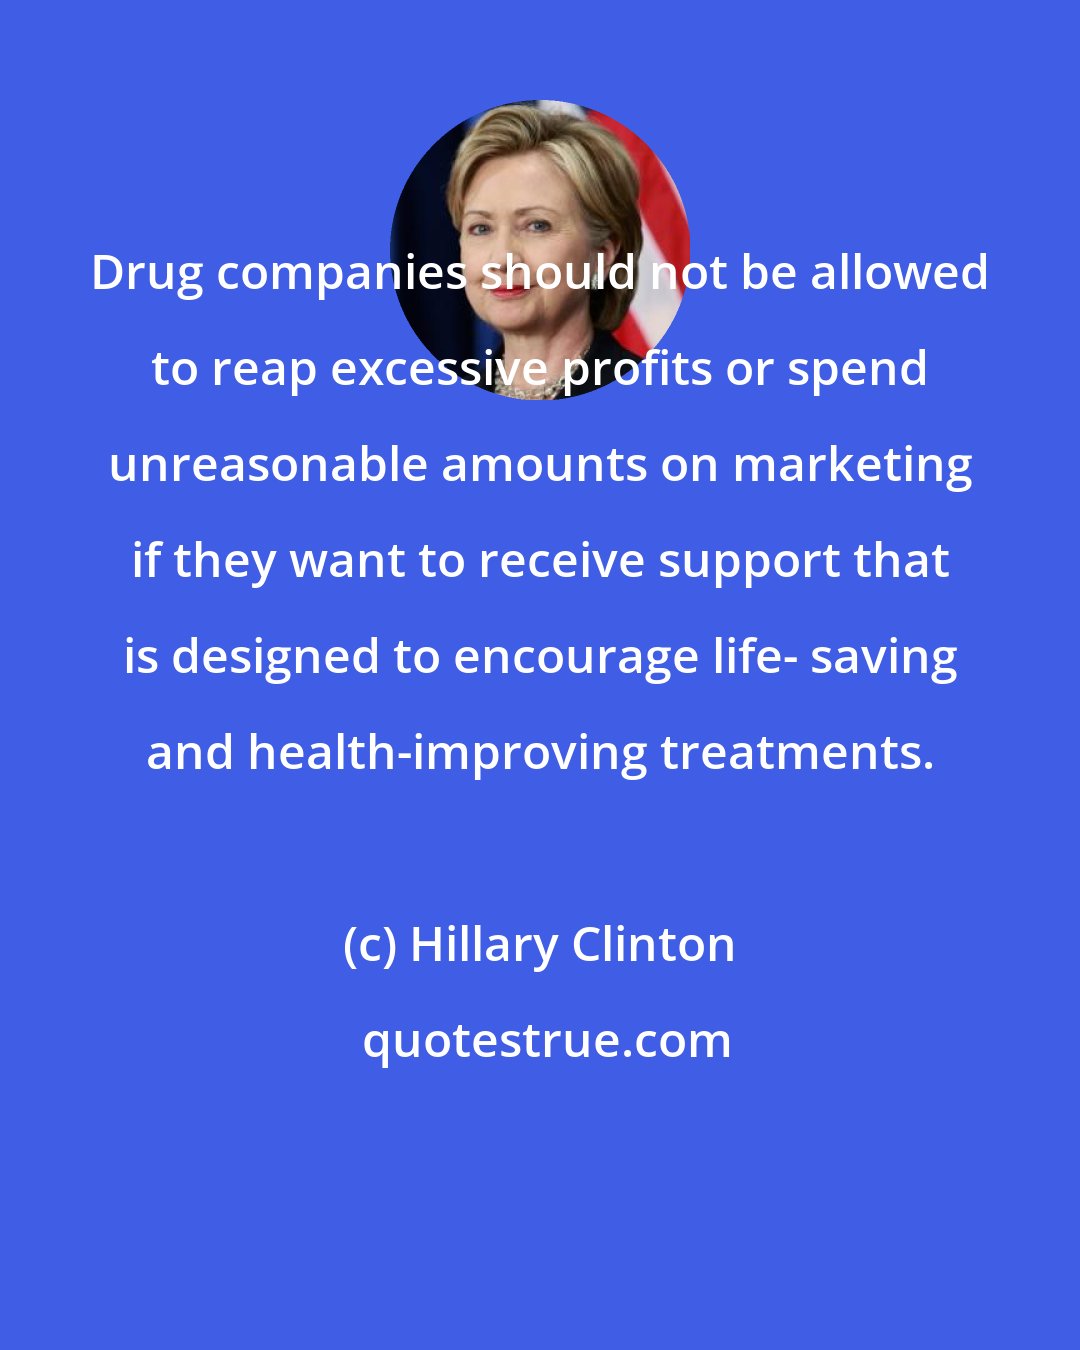 Hillary Clinton: Drug companies should not be allowed to reap excessive profits or spend unreasonable amounts on marketing if they want to receive support that is designed to encourage life- saving and health-improving treatments.